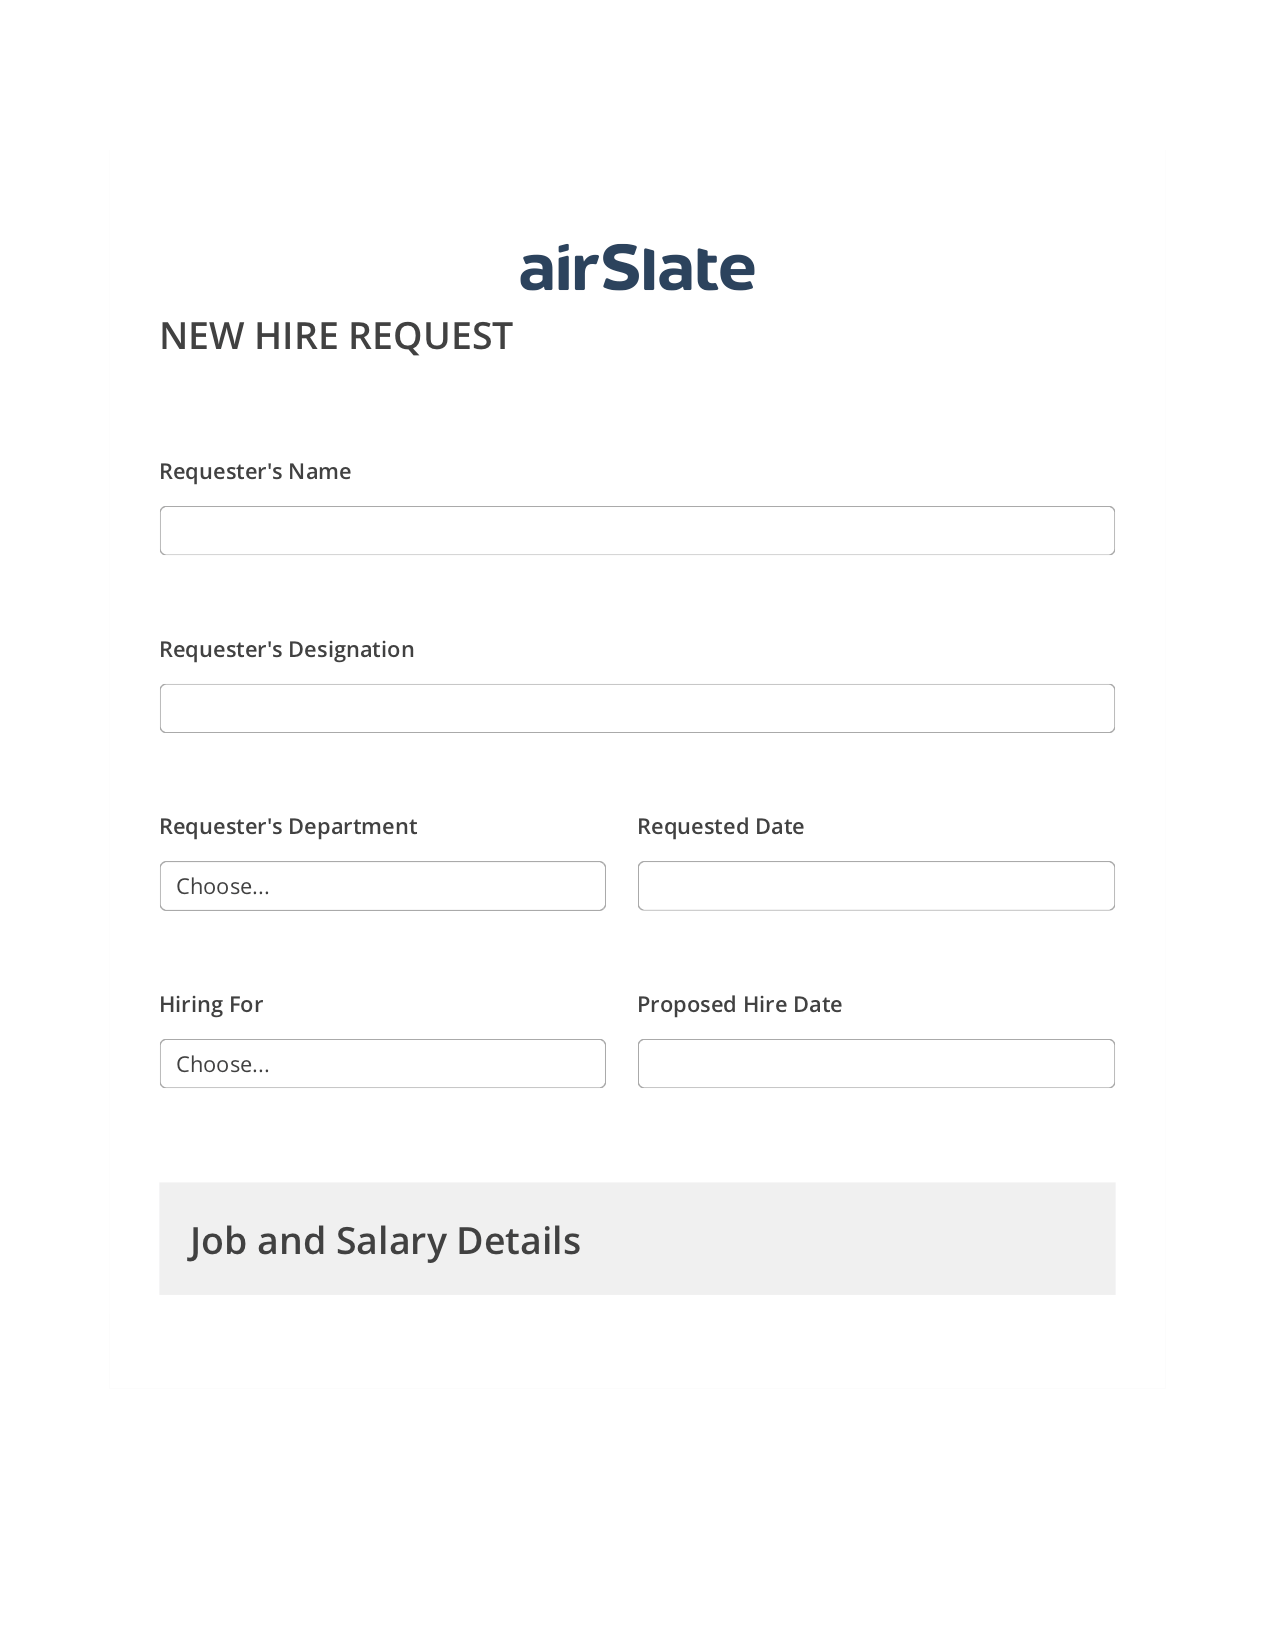 Hiring Request Workflow Pre-fill from Google Sheets Bot, Create slate from another Flow Bot, Webhook Postfinish Bot